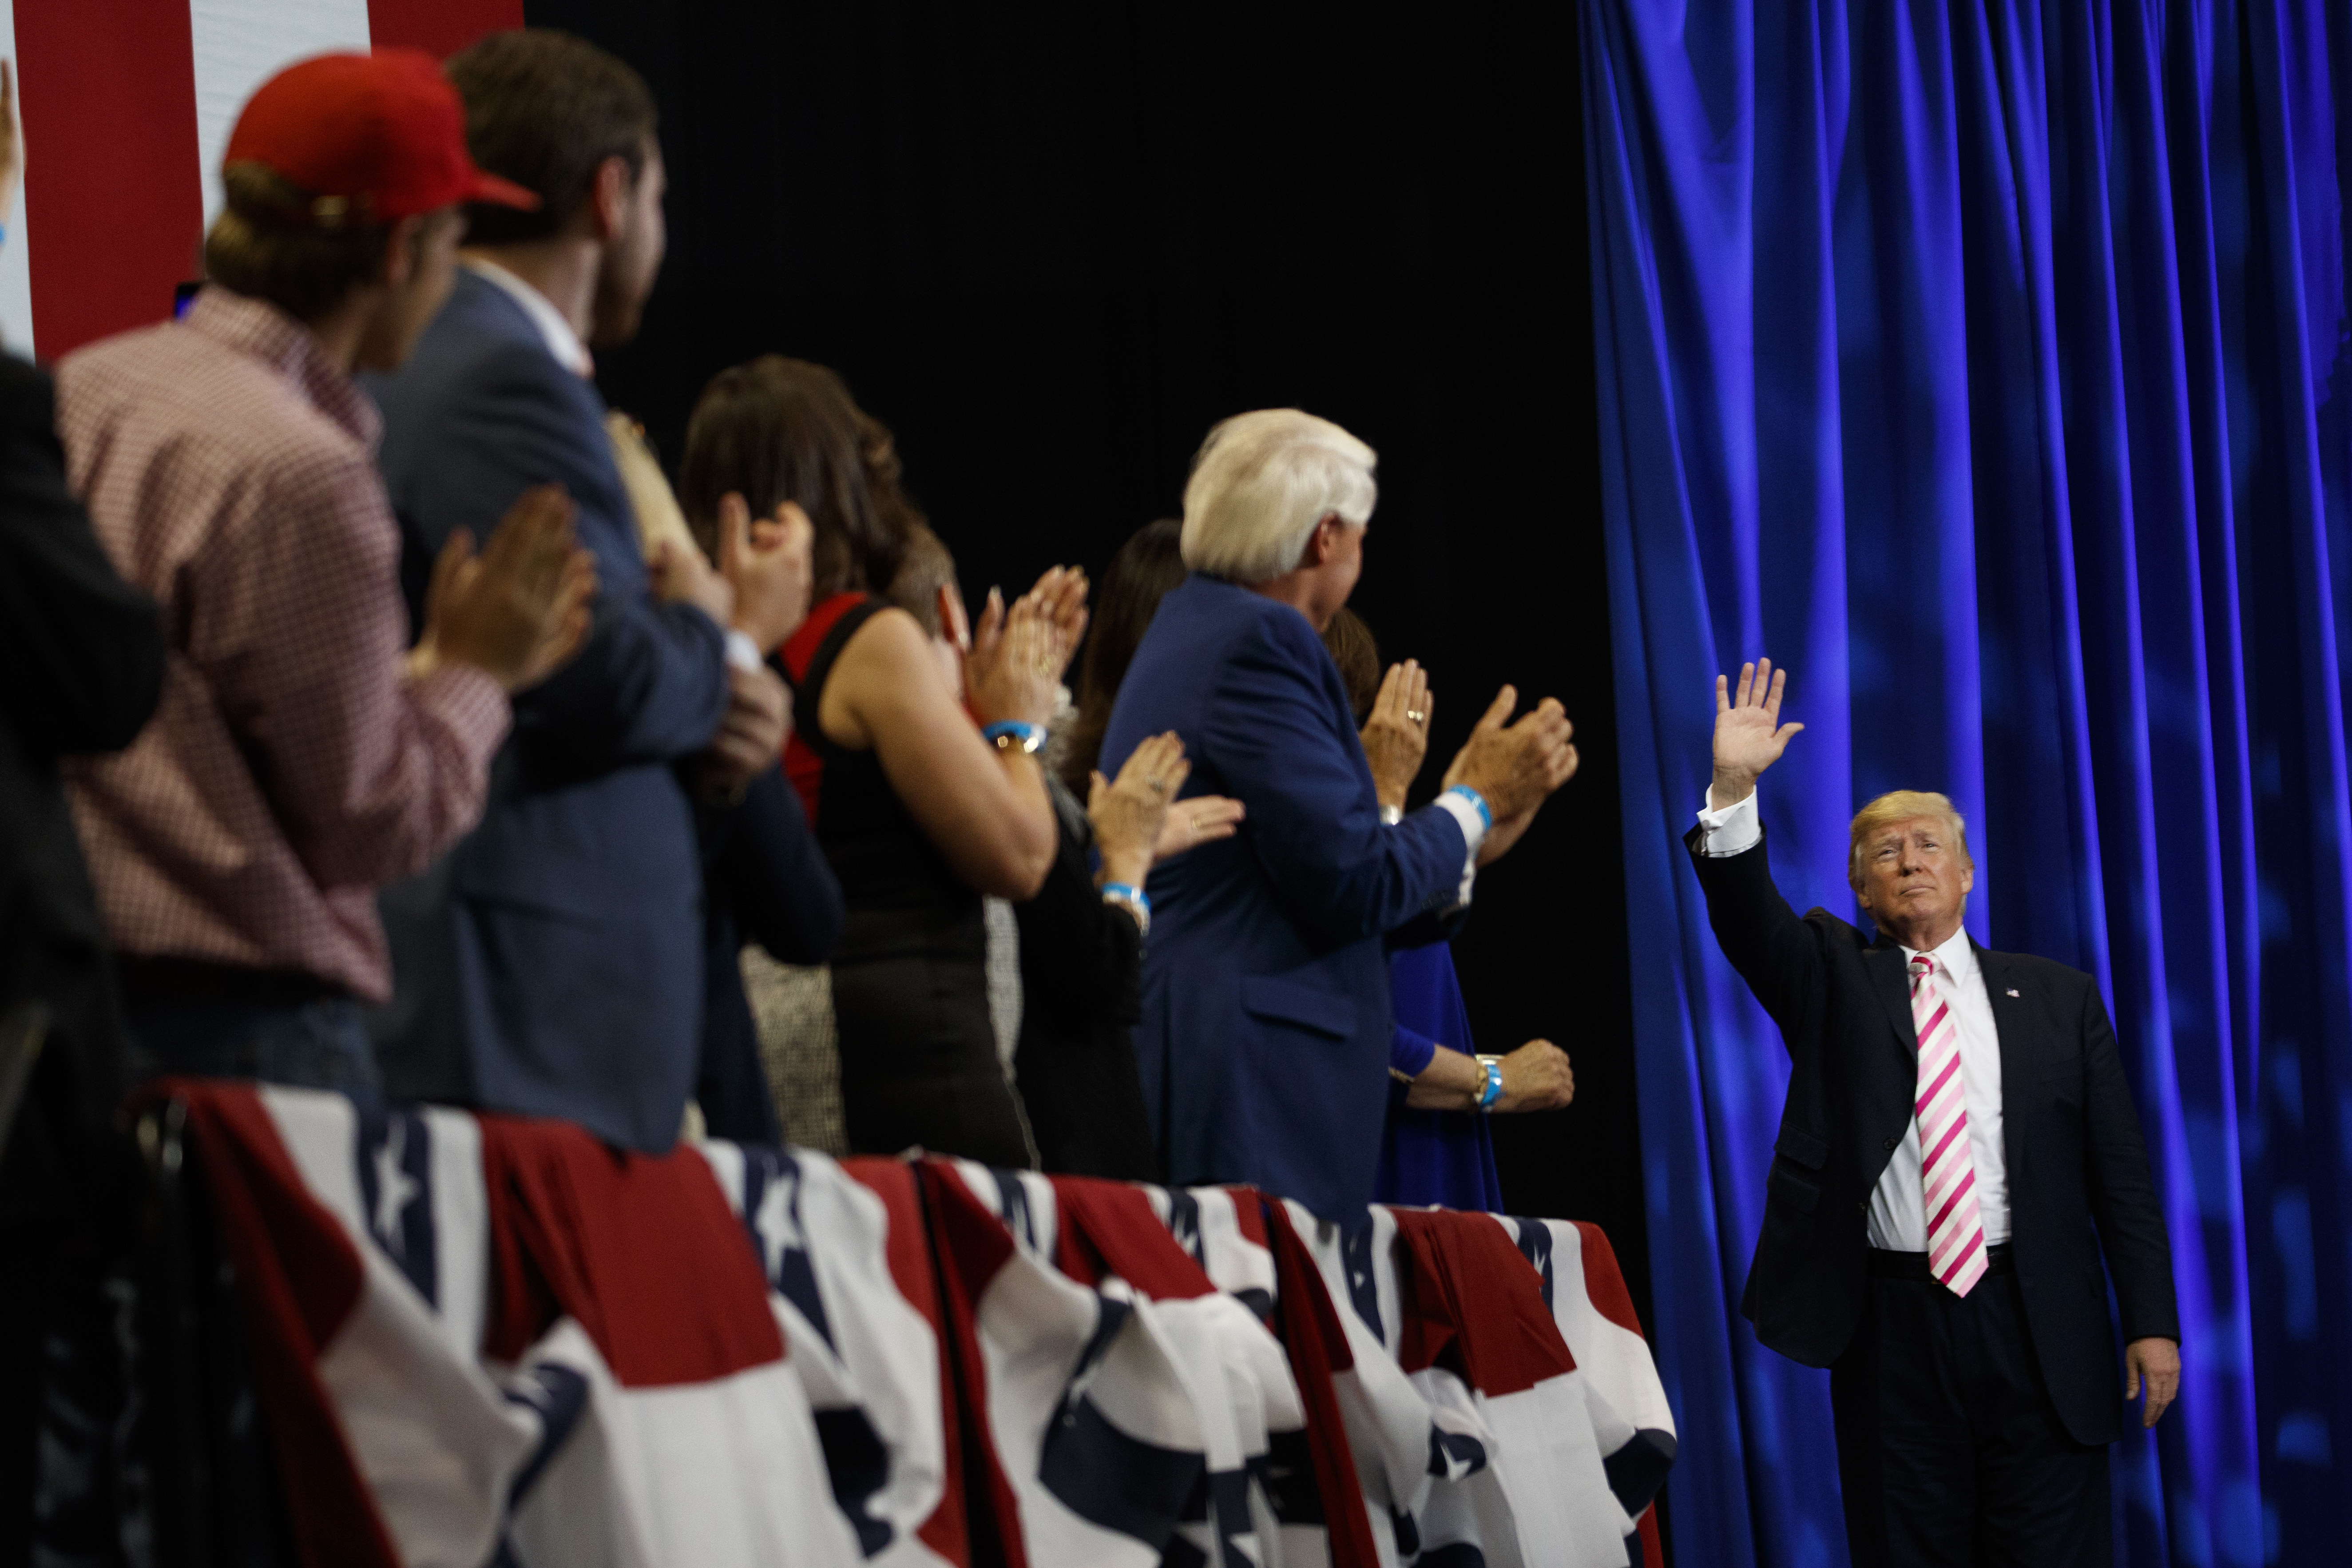 Donald Trump waves to supporters.